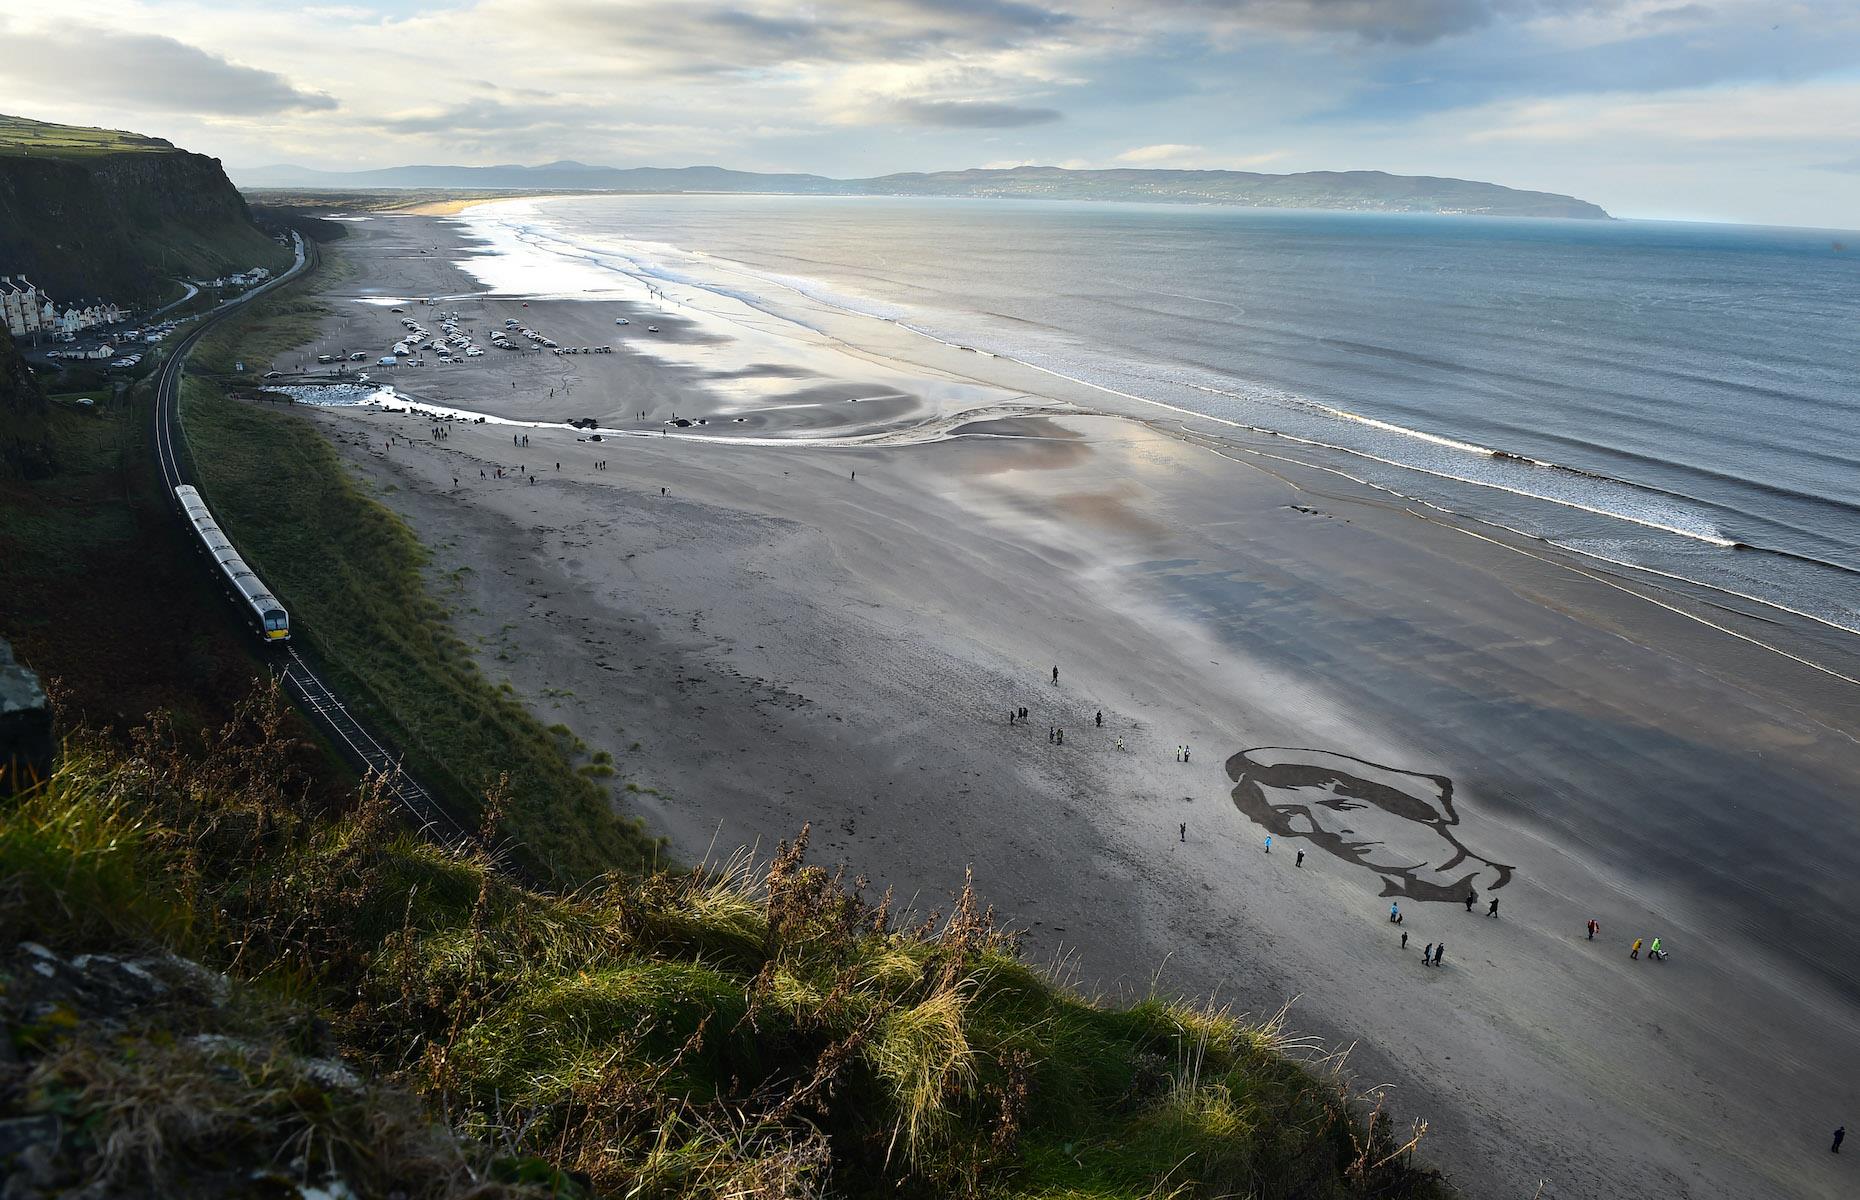 <p>Filmmaker Danny Boyle’s Armistice beach memorial Pages of the Sea was one of the nationwide visual arts projects of remembrance commissioned for the centenary of Armistice Day (the end of the First World War) on 11 November 2018. The striking visual arts project saw large-scale portraits carved into the sand on 32 beaches around the country – pictured here is a portrait drawn on Downhill Beach, County Londonderry, Northern Ireland, of British Army staff nurse Rachel Ferguson who lost her life in Bordighera, Italy, in 1918. The portraits were chosen by Boyle to tell the stories of the ordinary people who gave their lives to the war effort.</p>